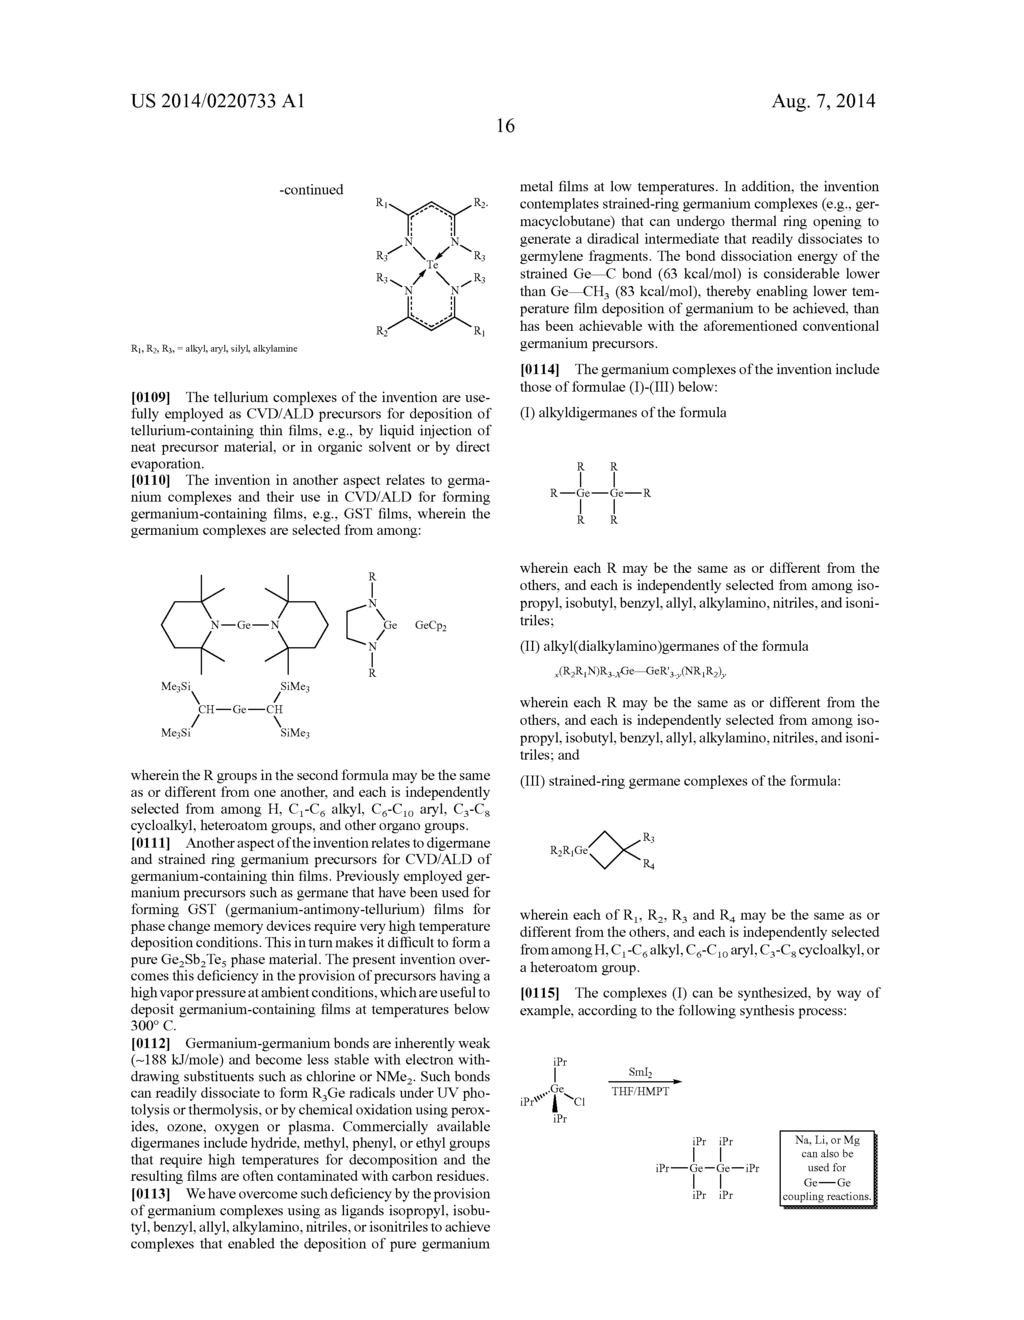 ANTIMONY AND GERMANIUM COMPLEXES USEFUL FOR CVD/ALD OF METAL THIN FILMS - diagram, schematic, and image 22